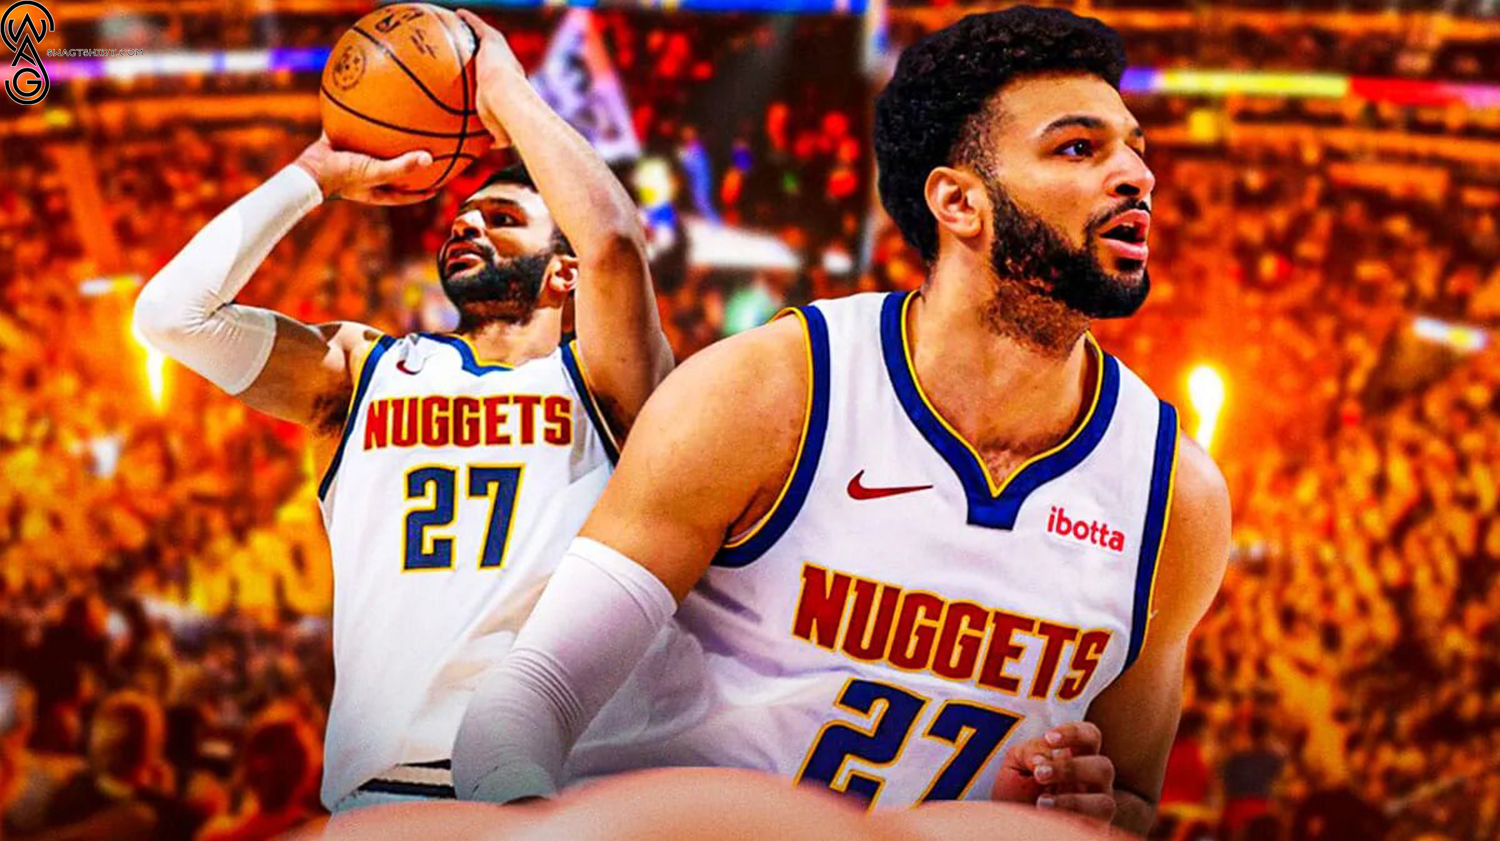 Jamal Murray's Injury Clouds Game 5, Nuggets Aim for Series Clincher